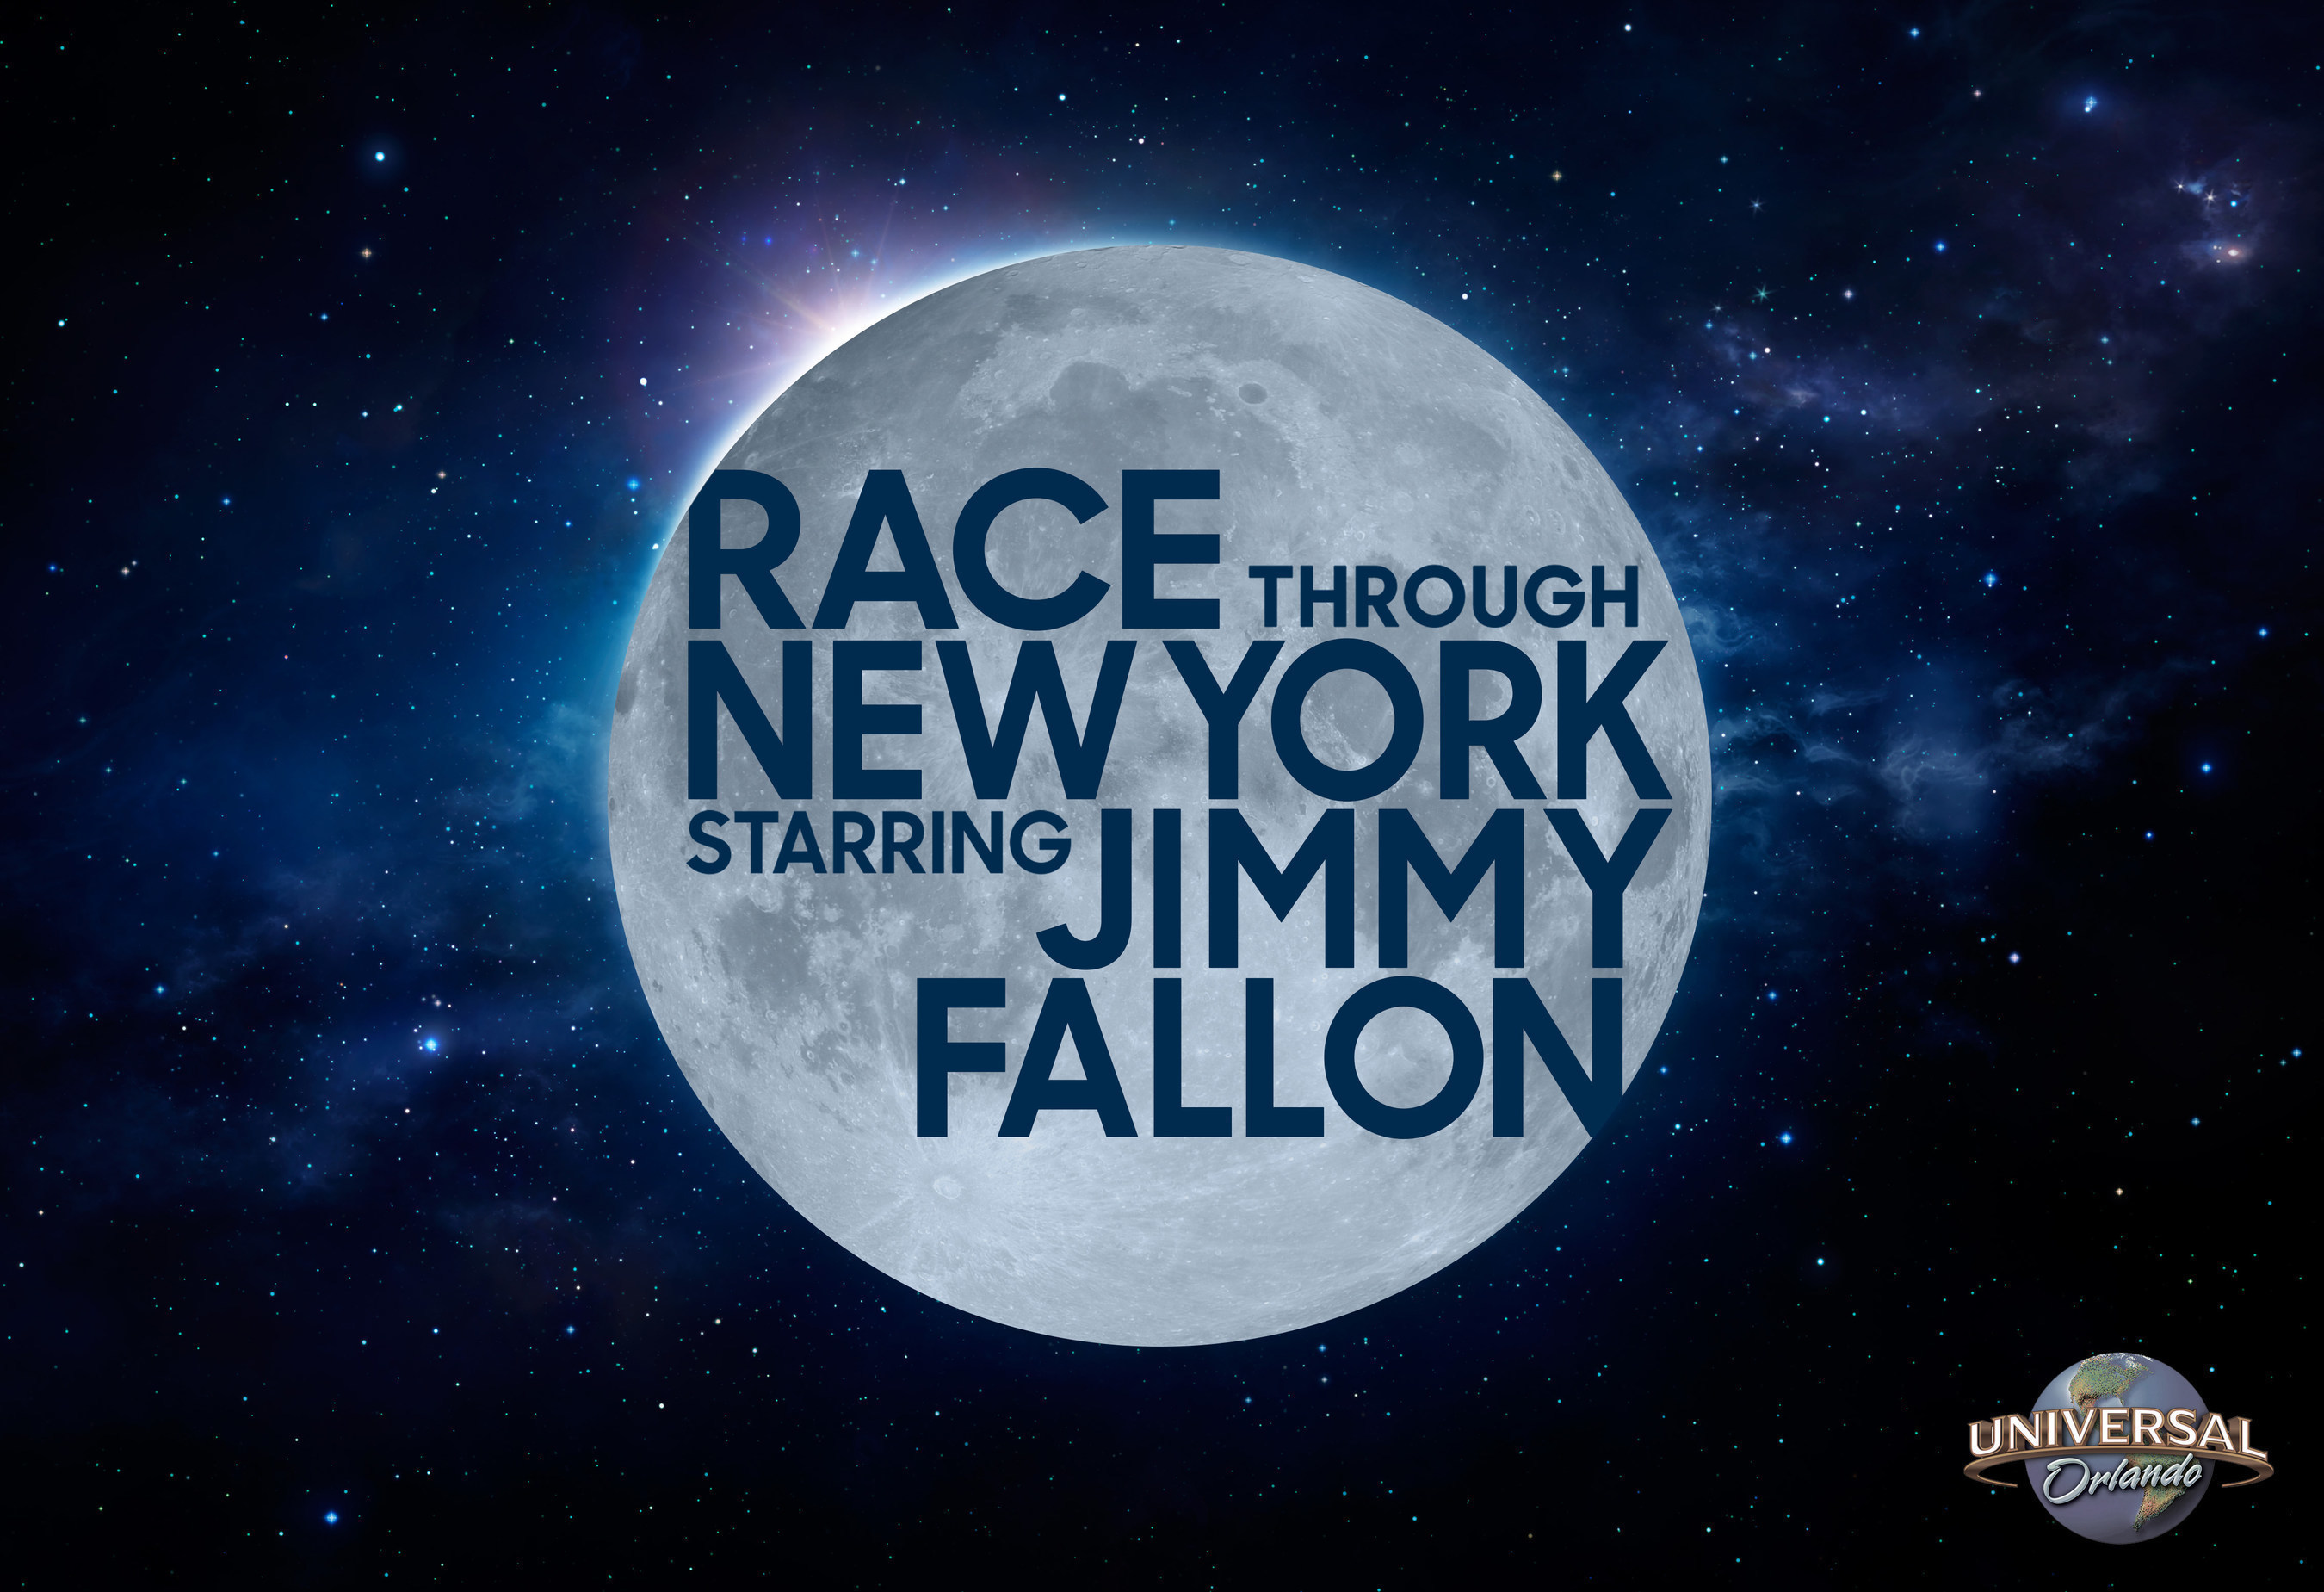 In 2017, Jimmy Fallon - host of "The Tonight Show Starring Jimmy Fallon" and one of today's funniest comedians - will be the star of a brand-new hilarious ride experience at Universal Orlando Resort called, "Race through New York Starring Jimmy Fallon."